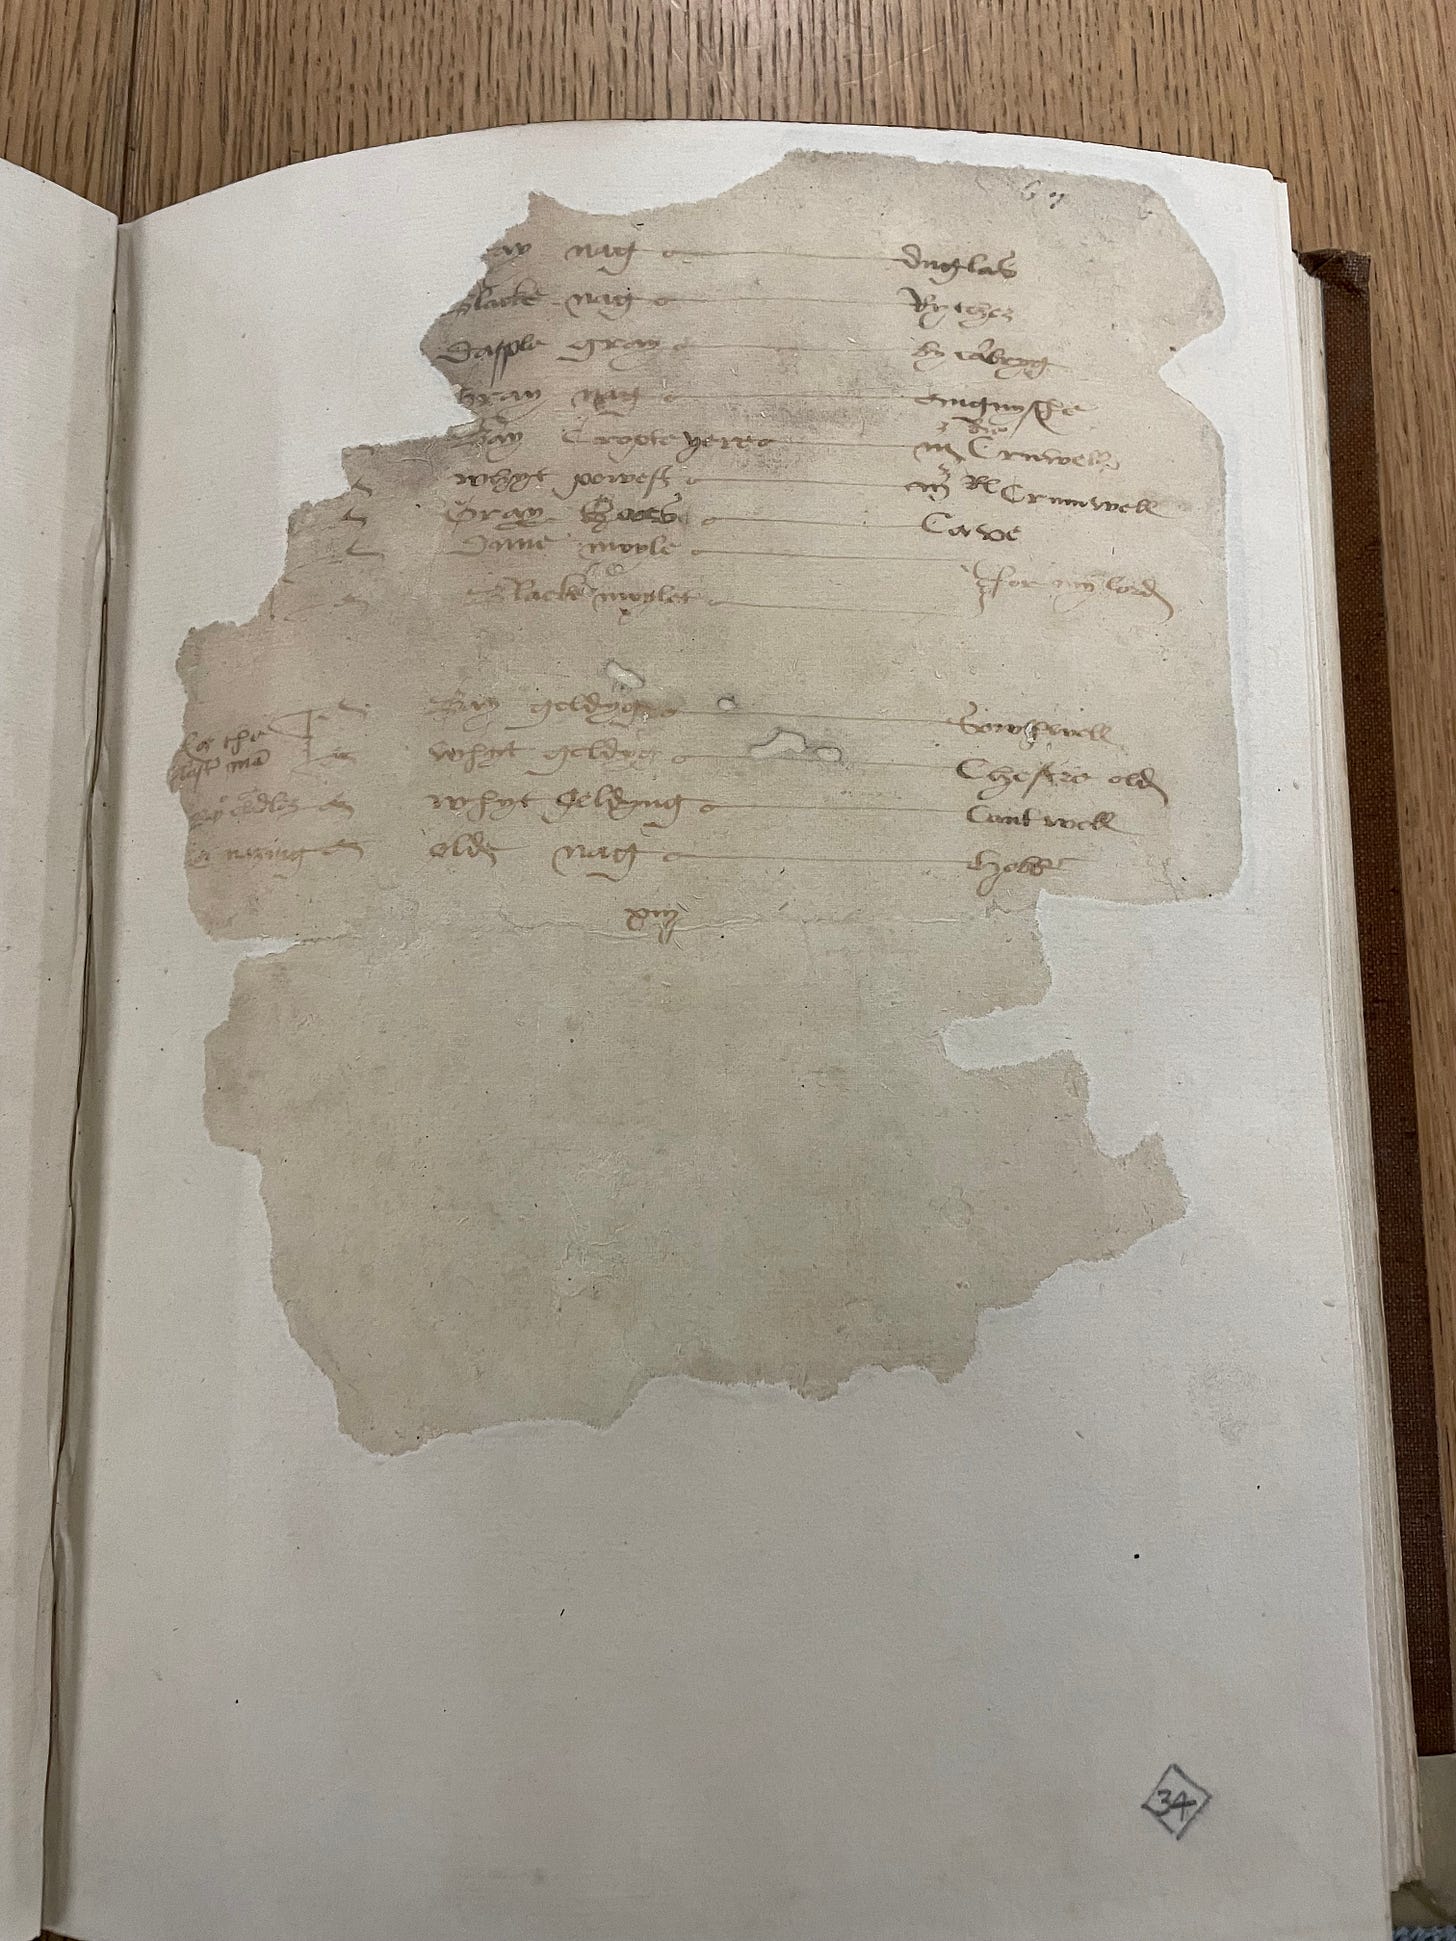 A very damaged piece of parchment with sixteenth century writing pasted into a book. The writing is faded.